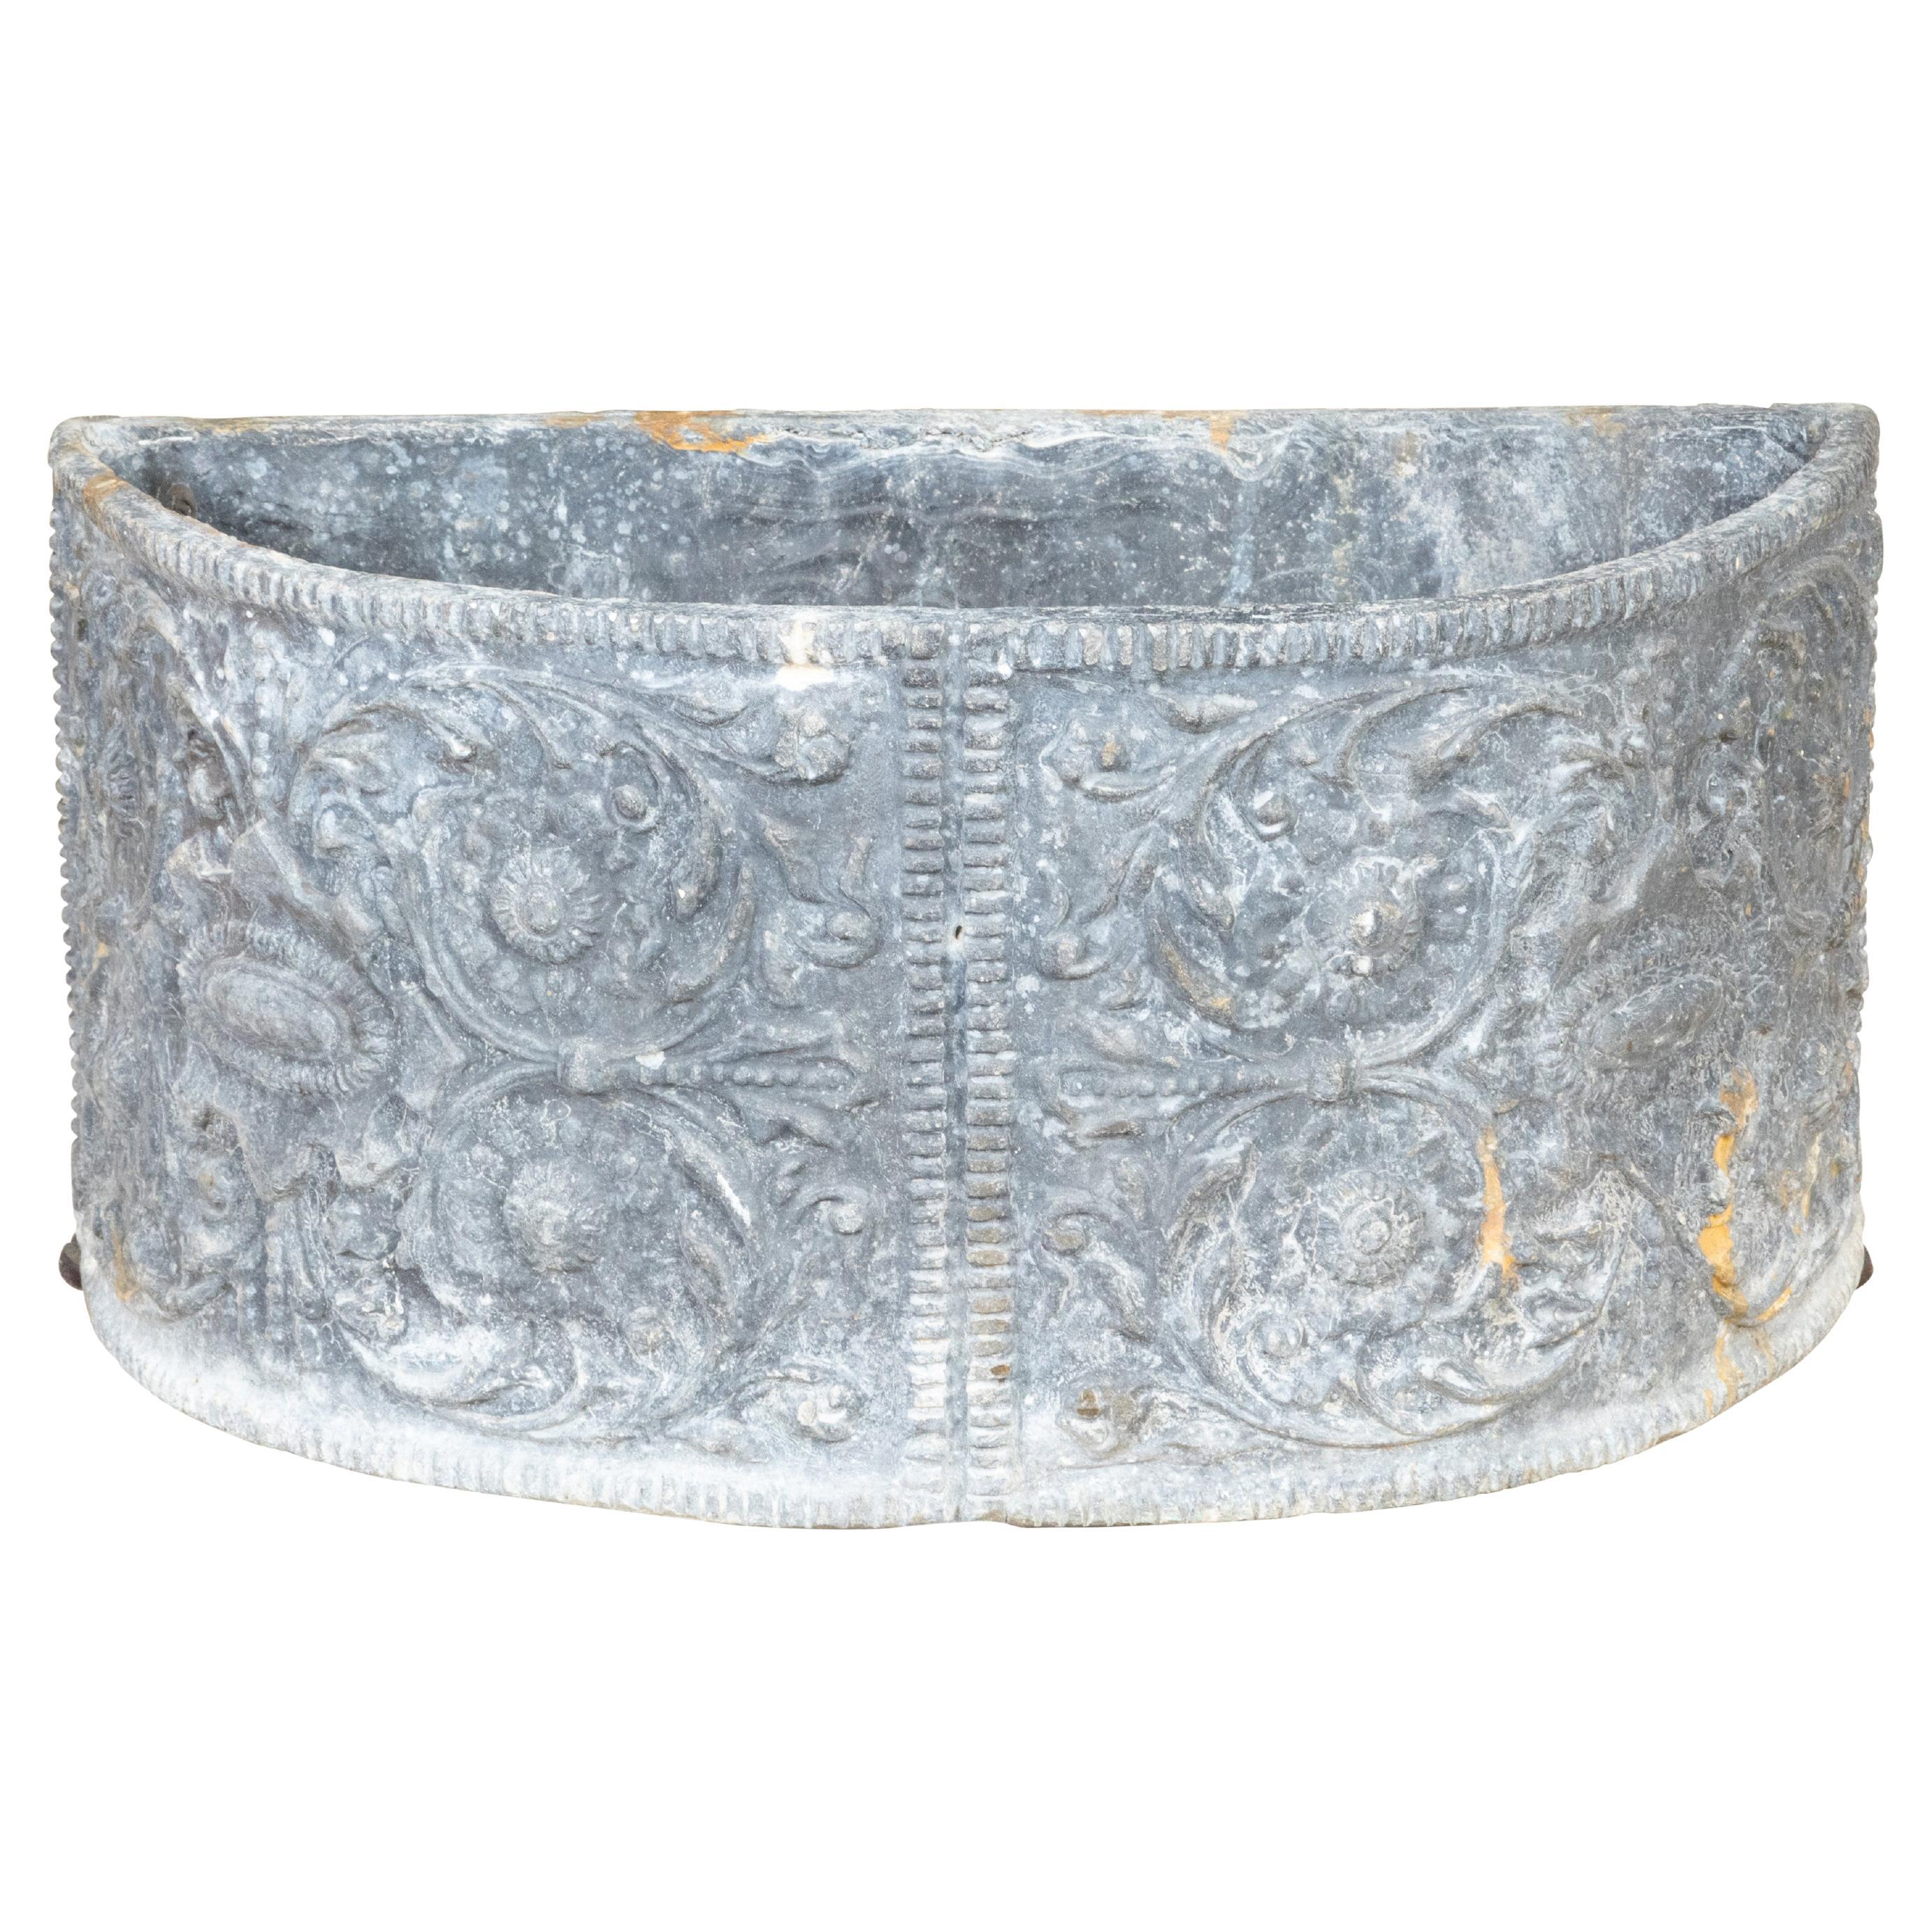 French Turn of the Century Semi-Circular Lead Jardinière with Scrollwork Foliage